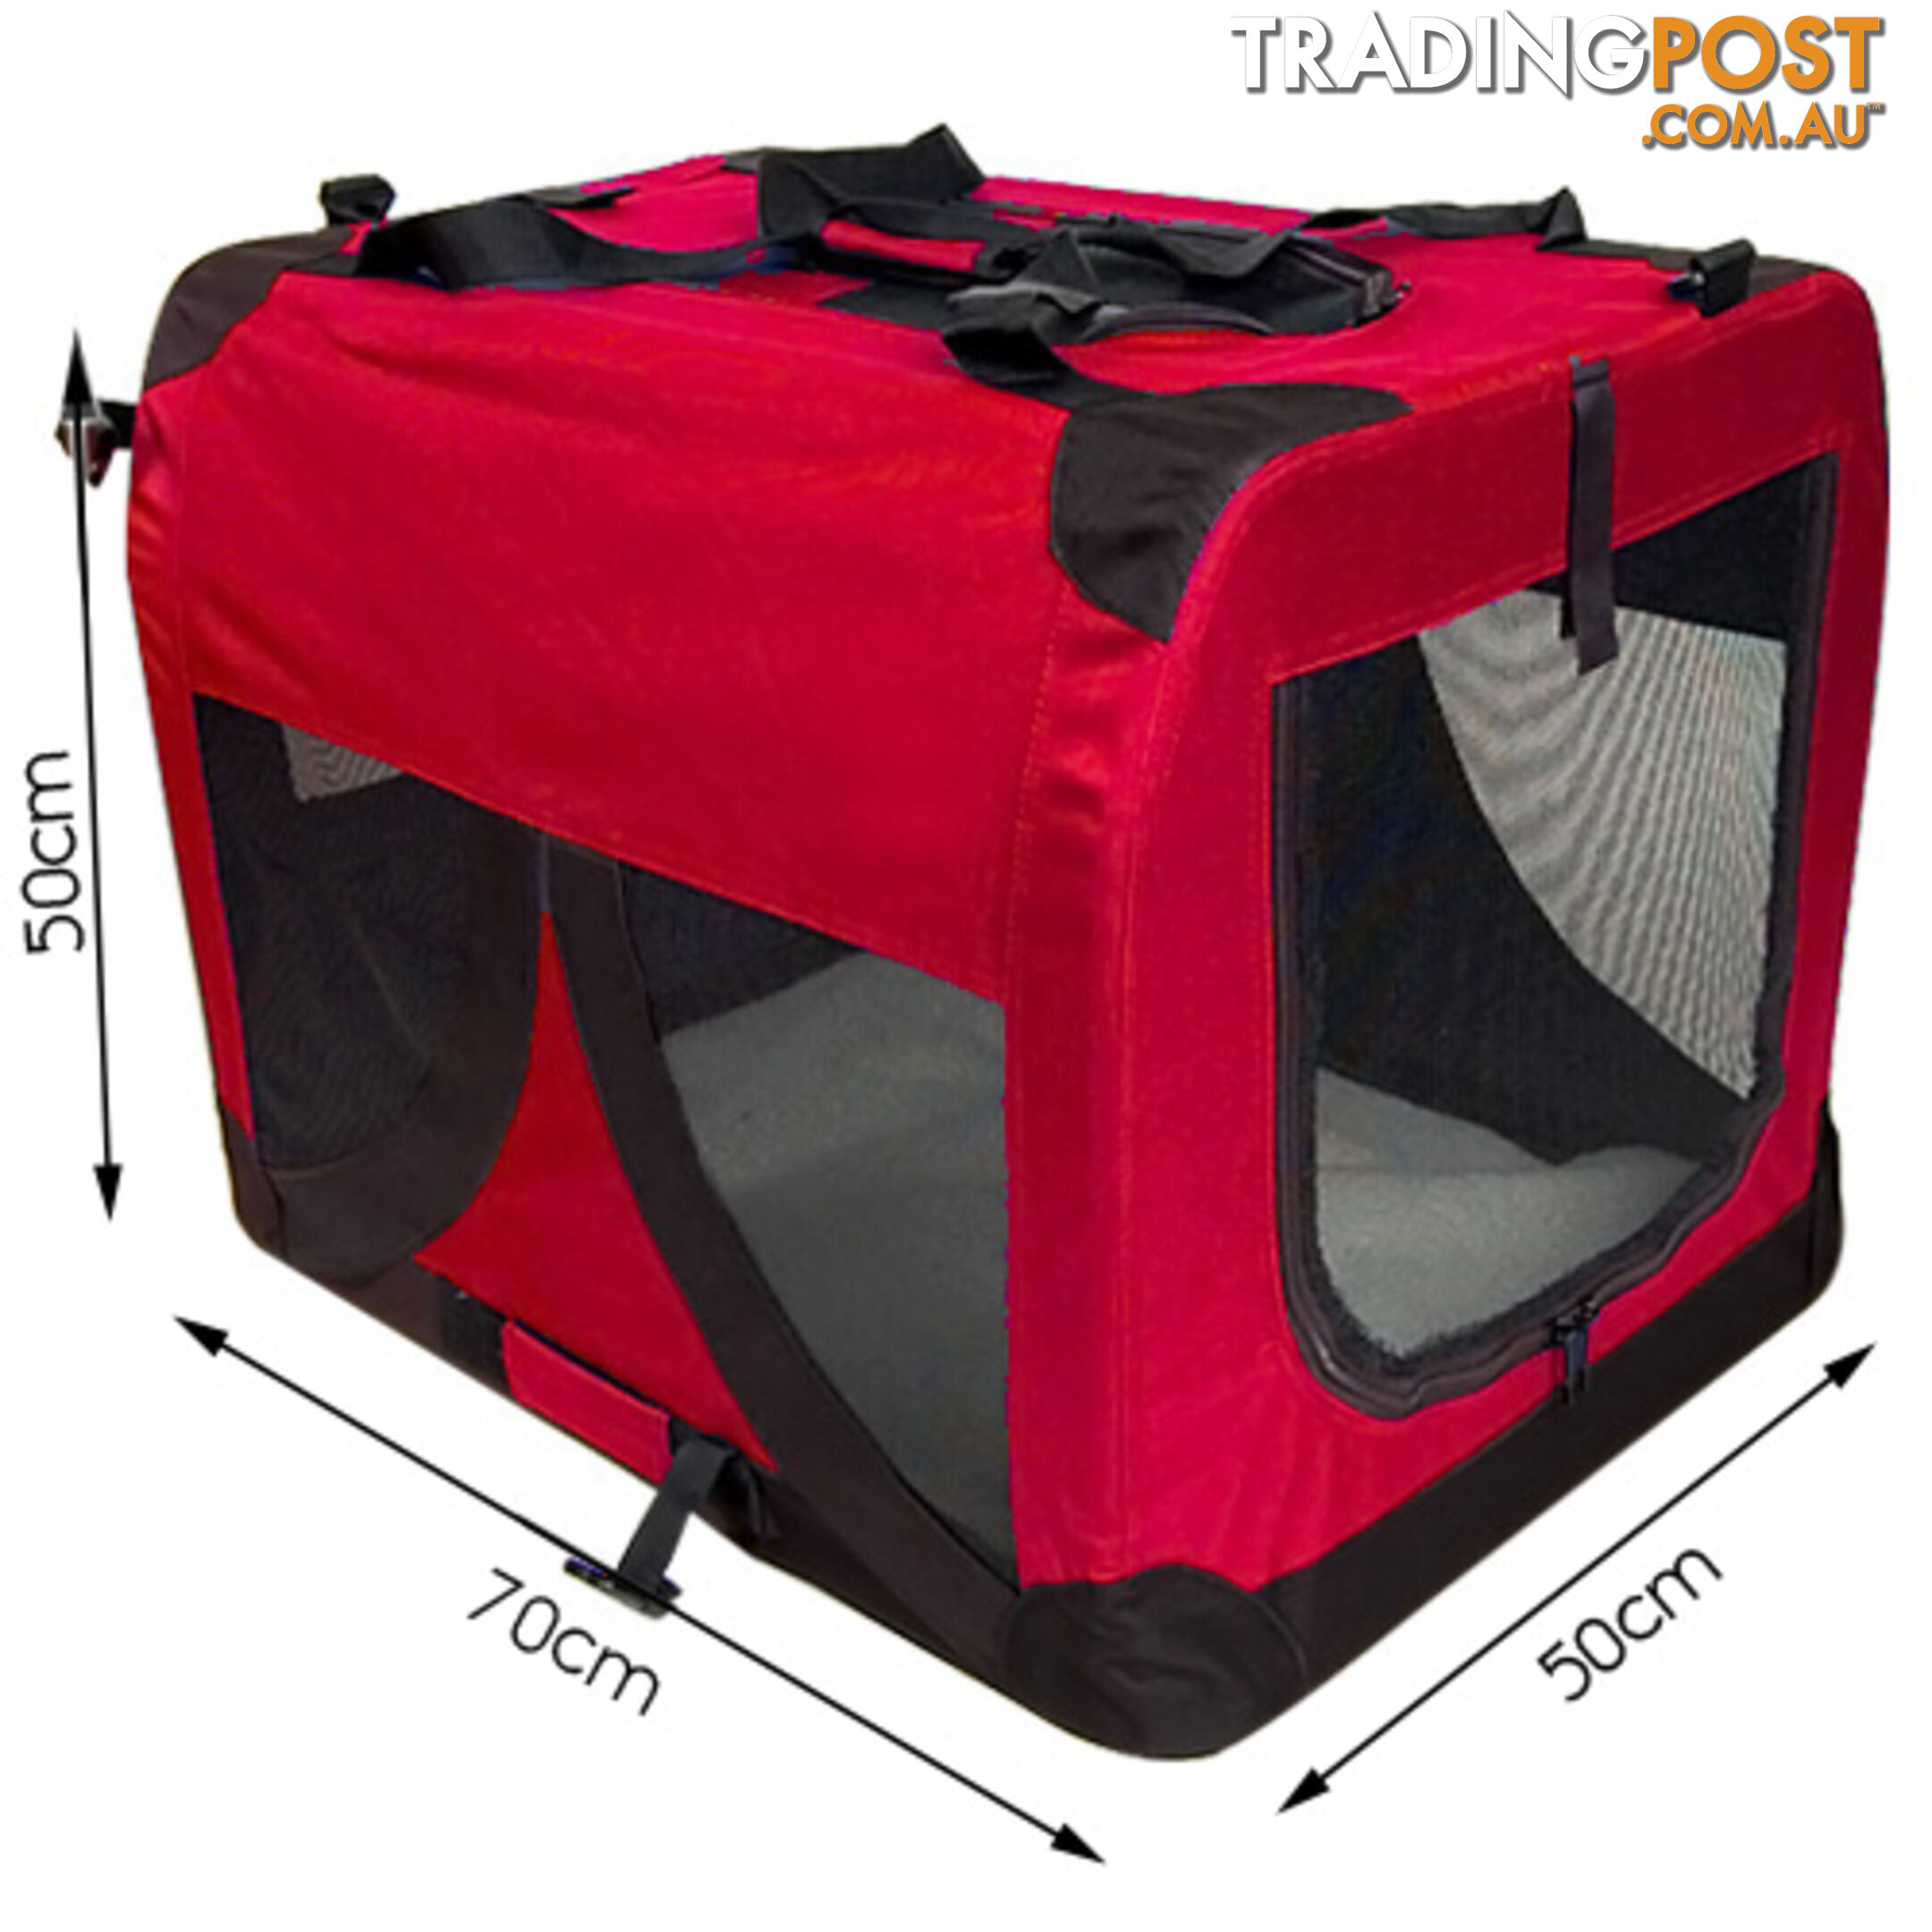 Large Portable Pet Soft Cage Puppy Dog Cat Crate Carrier Foldable Kennel Red